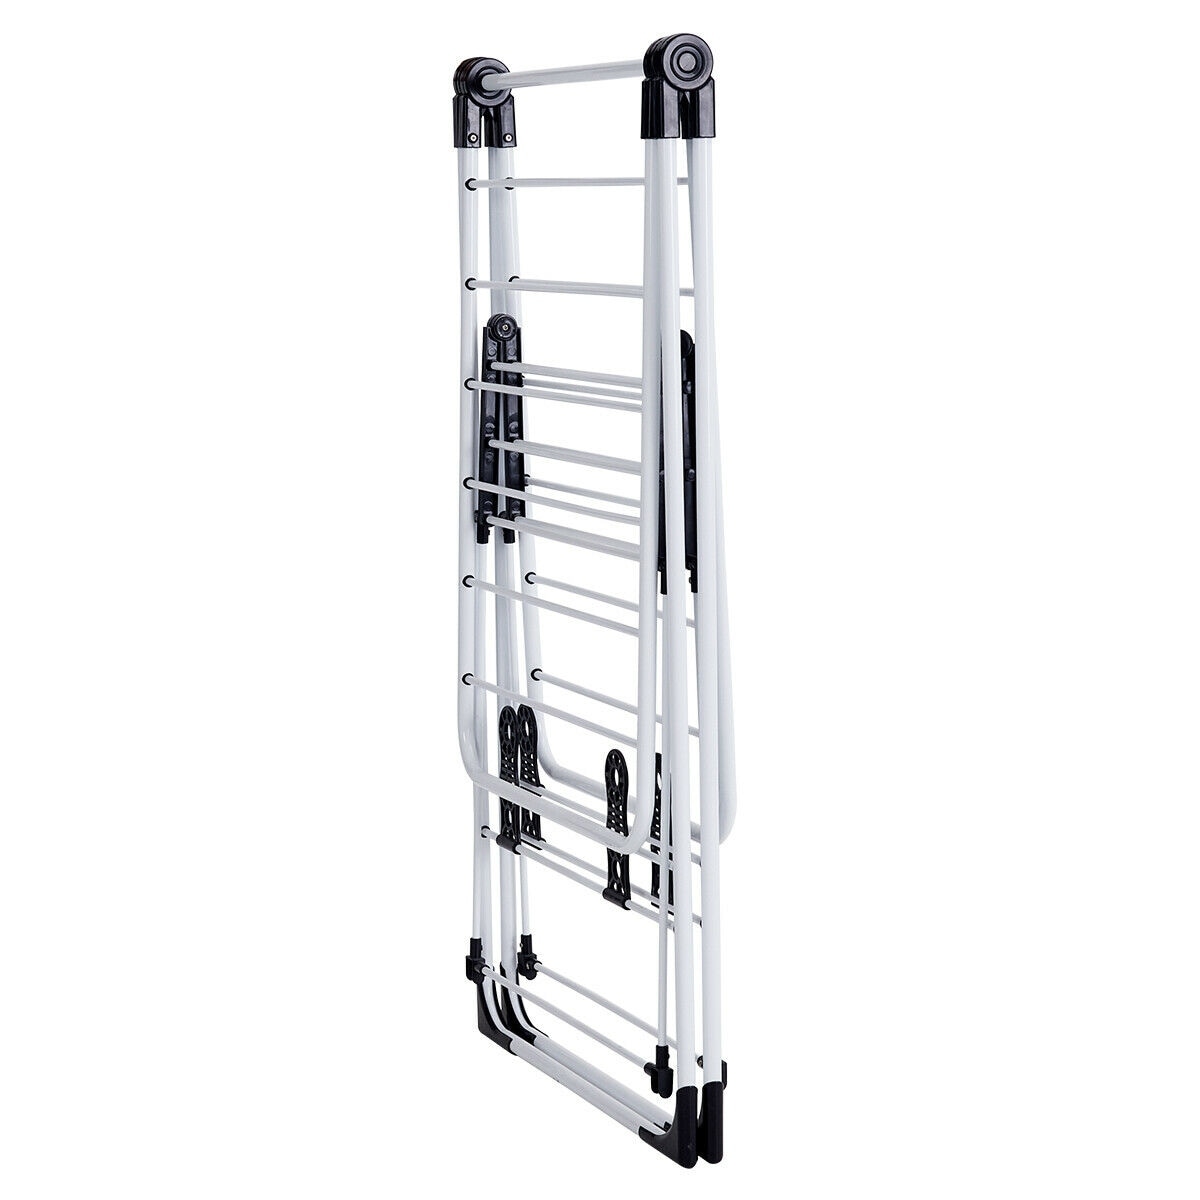 Stainless steel X Wing Foldable Cloth Airer Drying